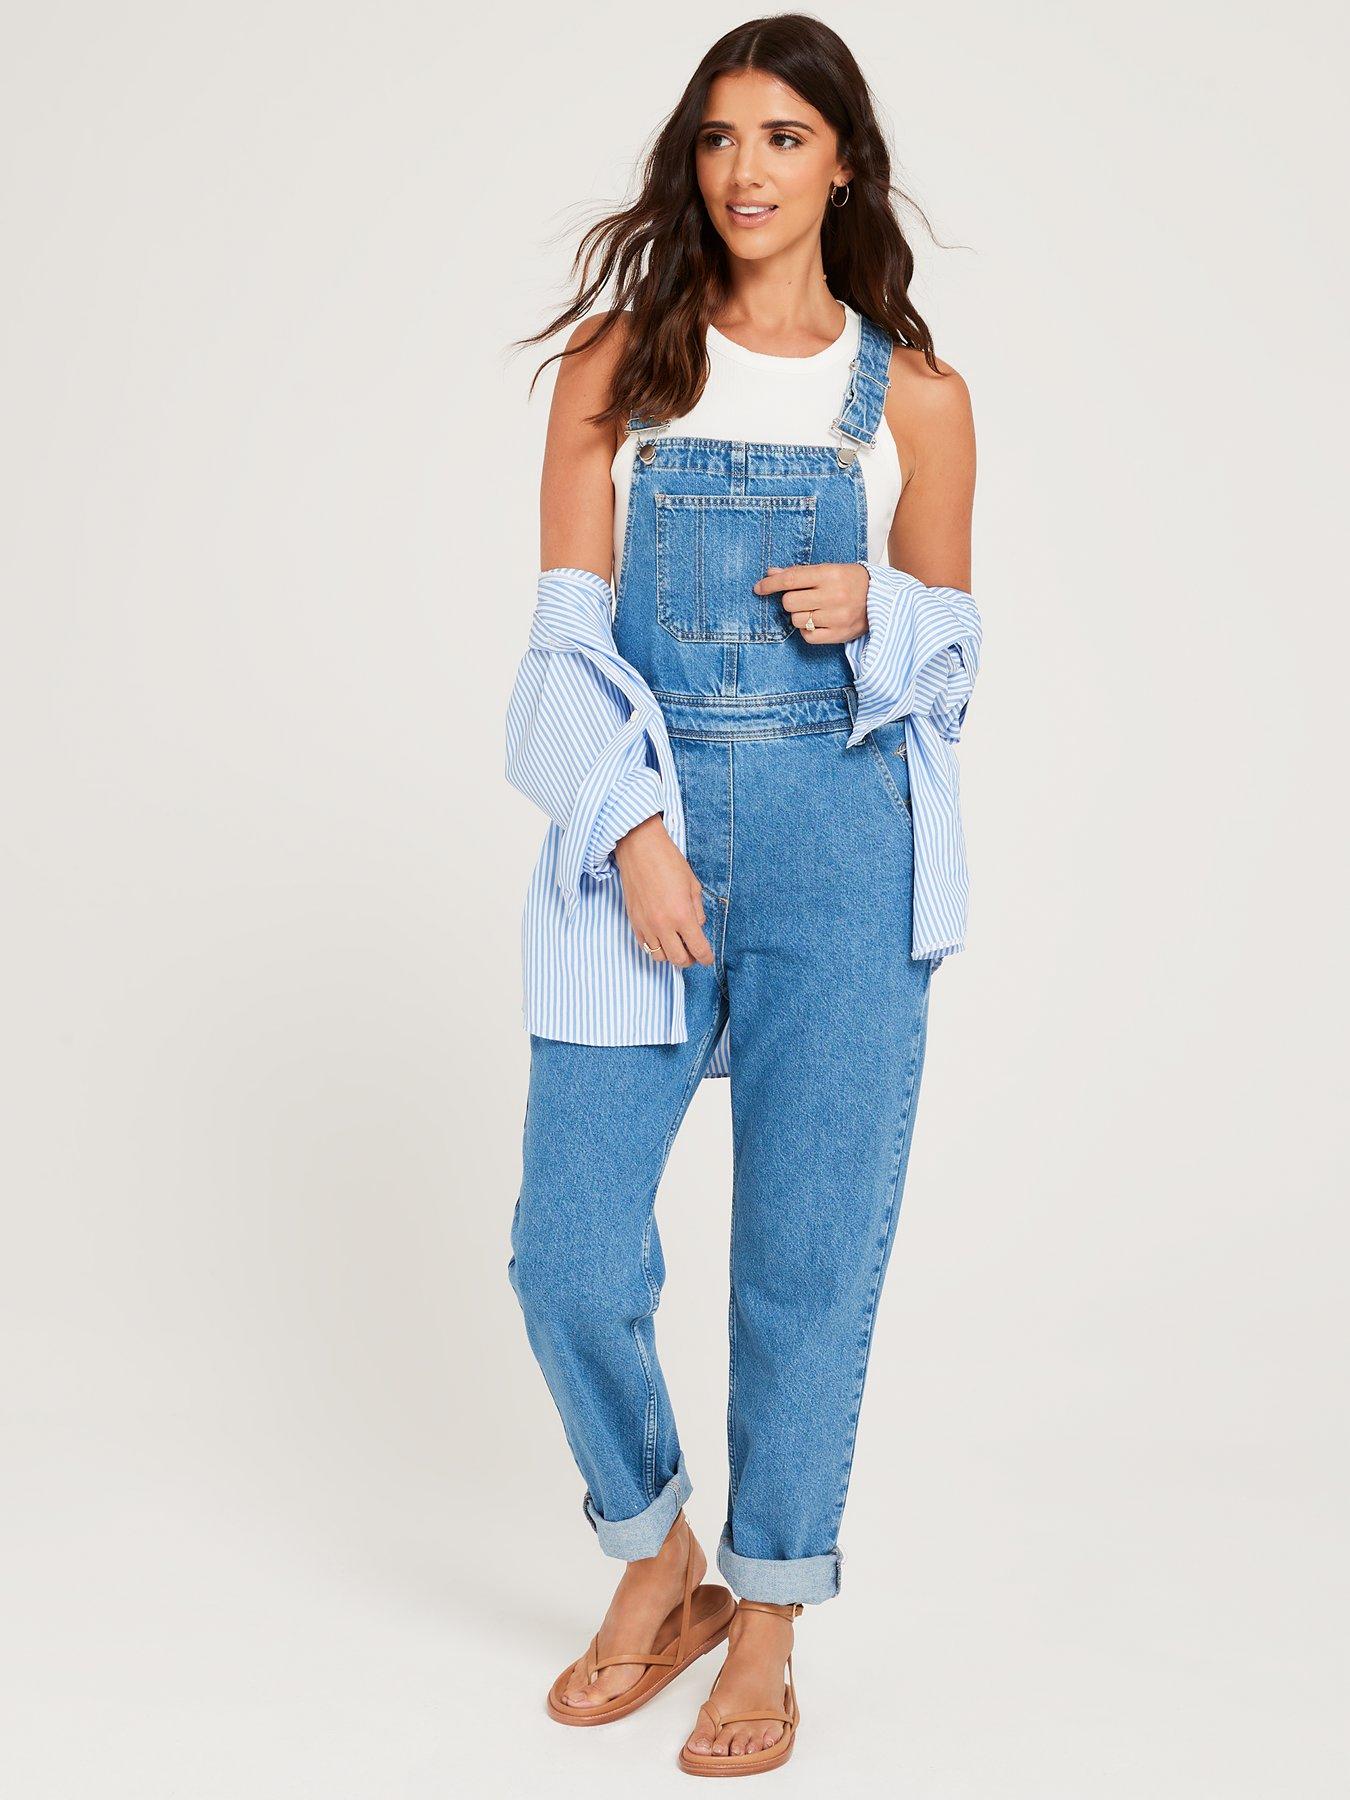 Lucy Mecklenburgh x V by Very Denim Dungarees - Blue